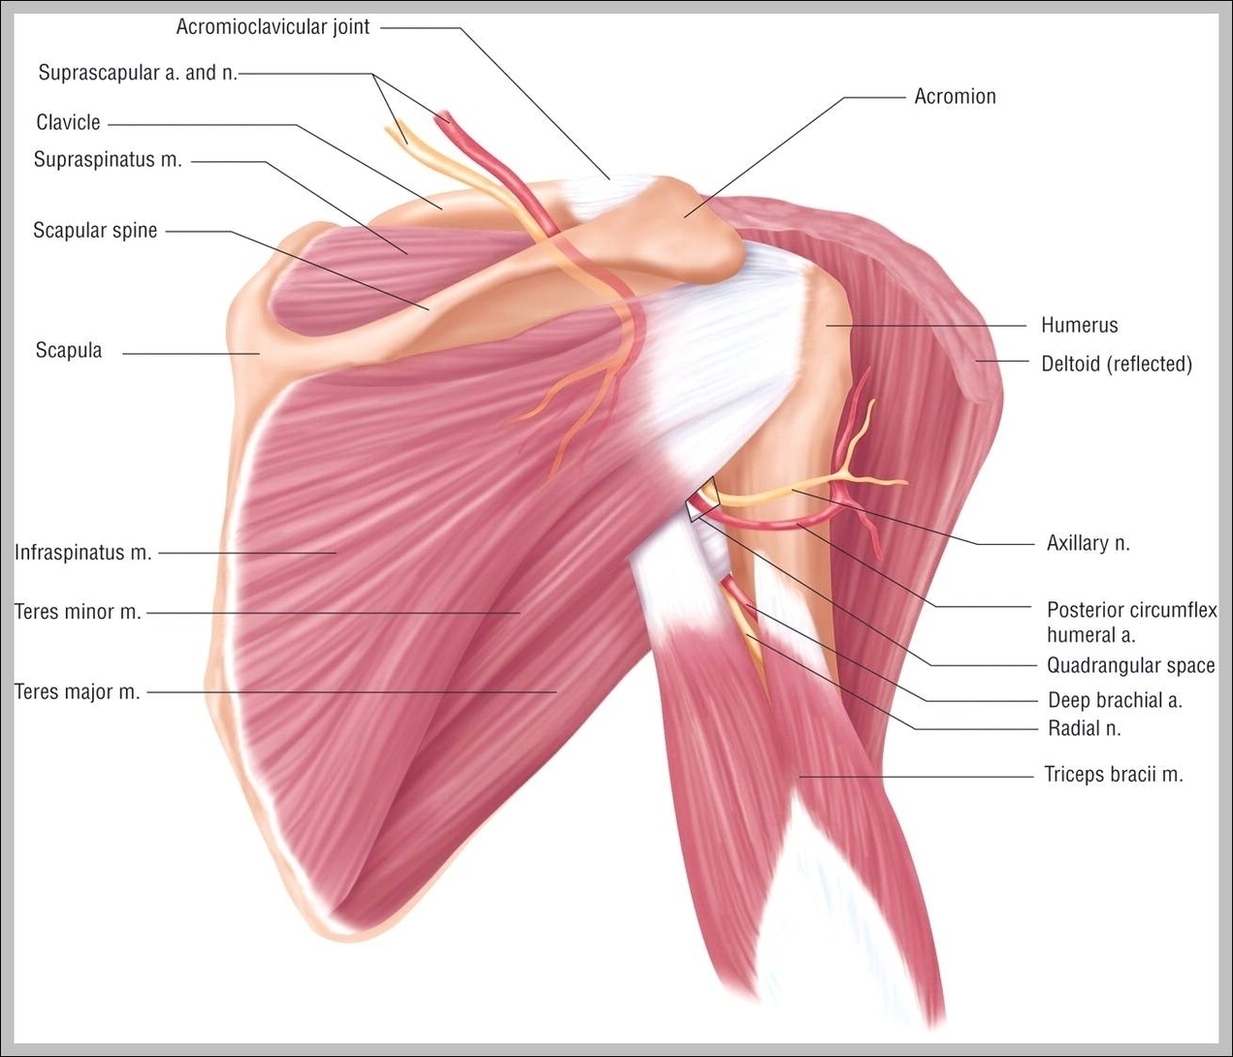 Pictures Of Shoulder Muscles Image